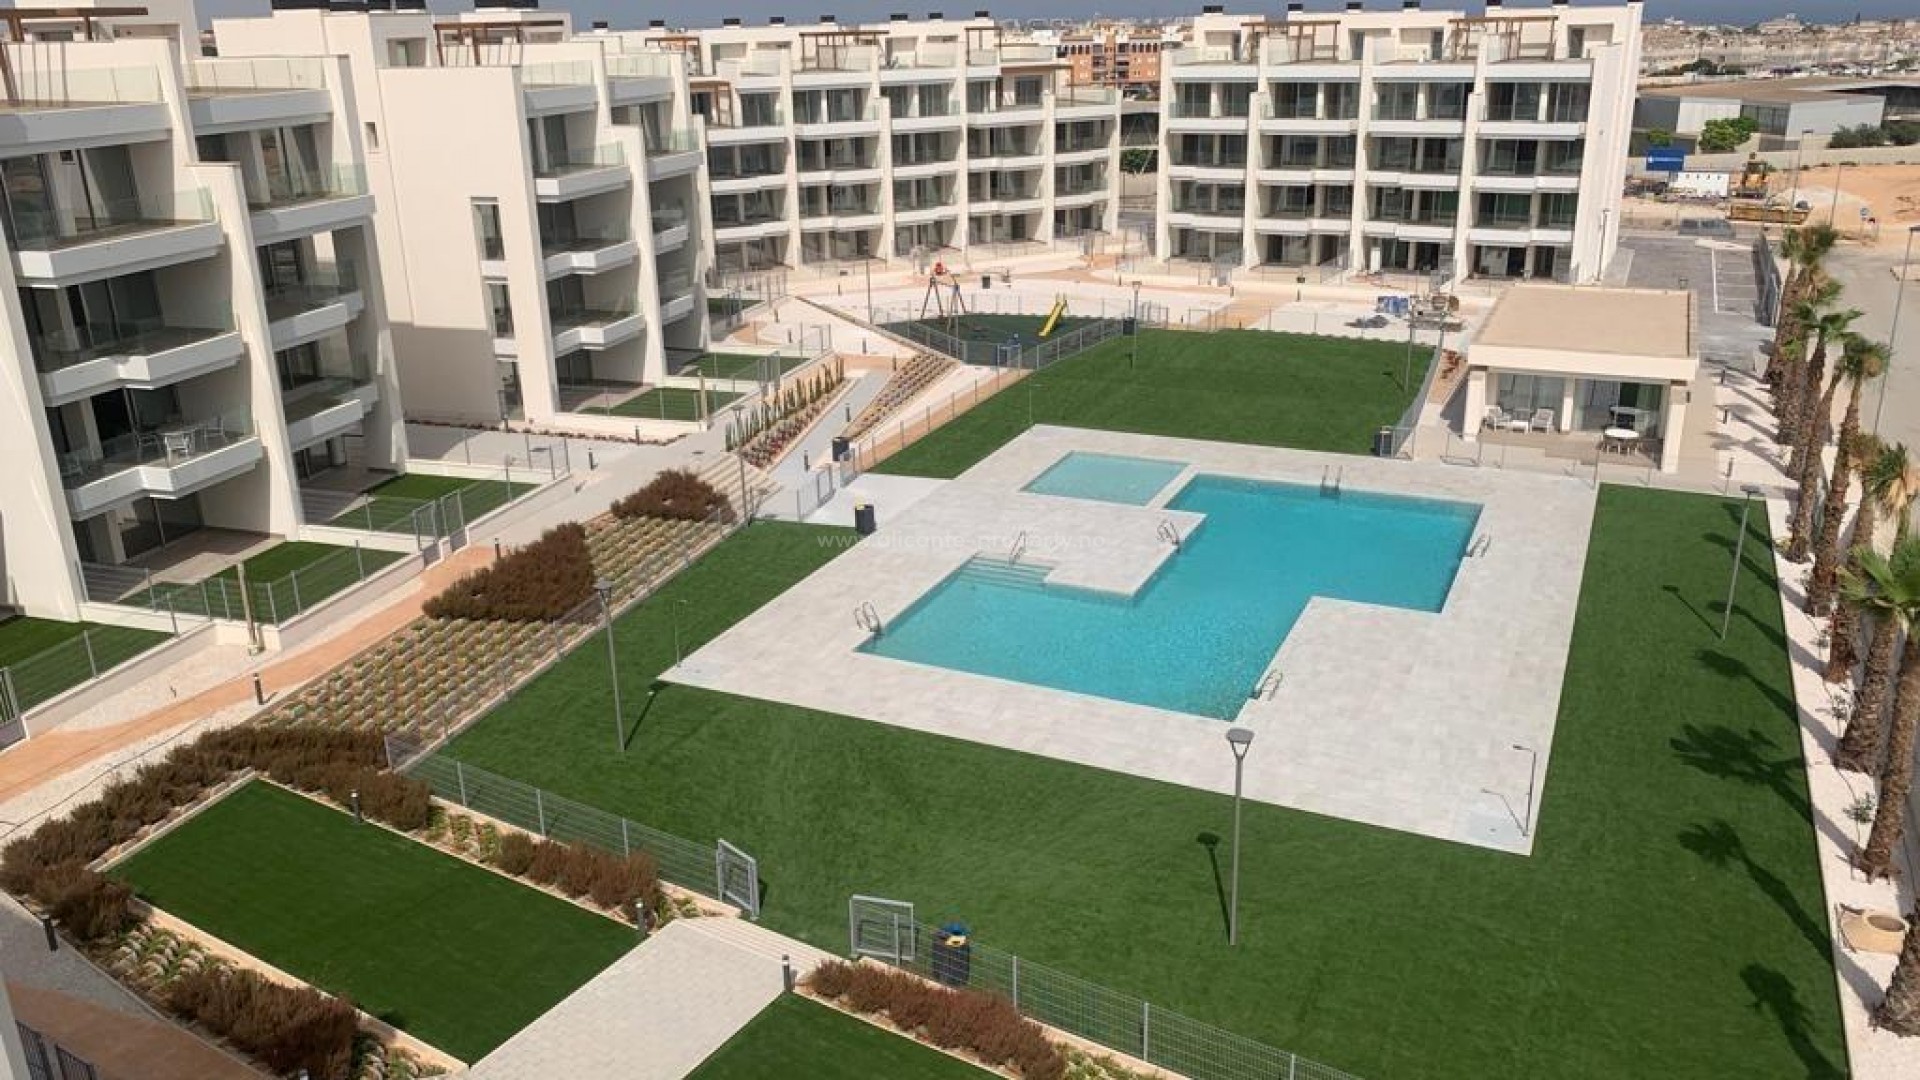 New built residential complex in Vallamartin, flats/penthouse 2 bedrooms, 2 bathrooms, garden or sunny roof terrace with fantastic views, shared pool